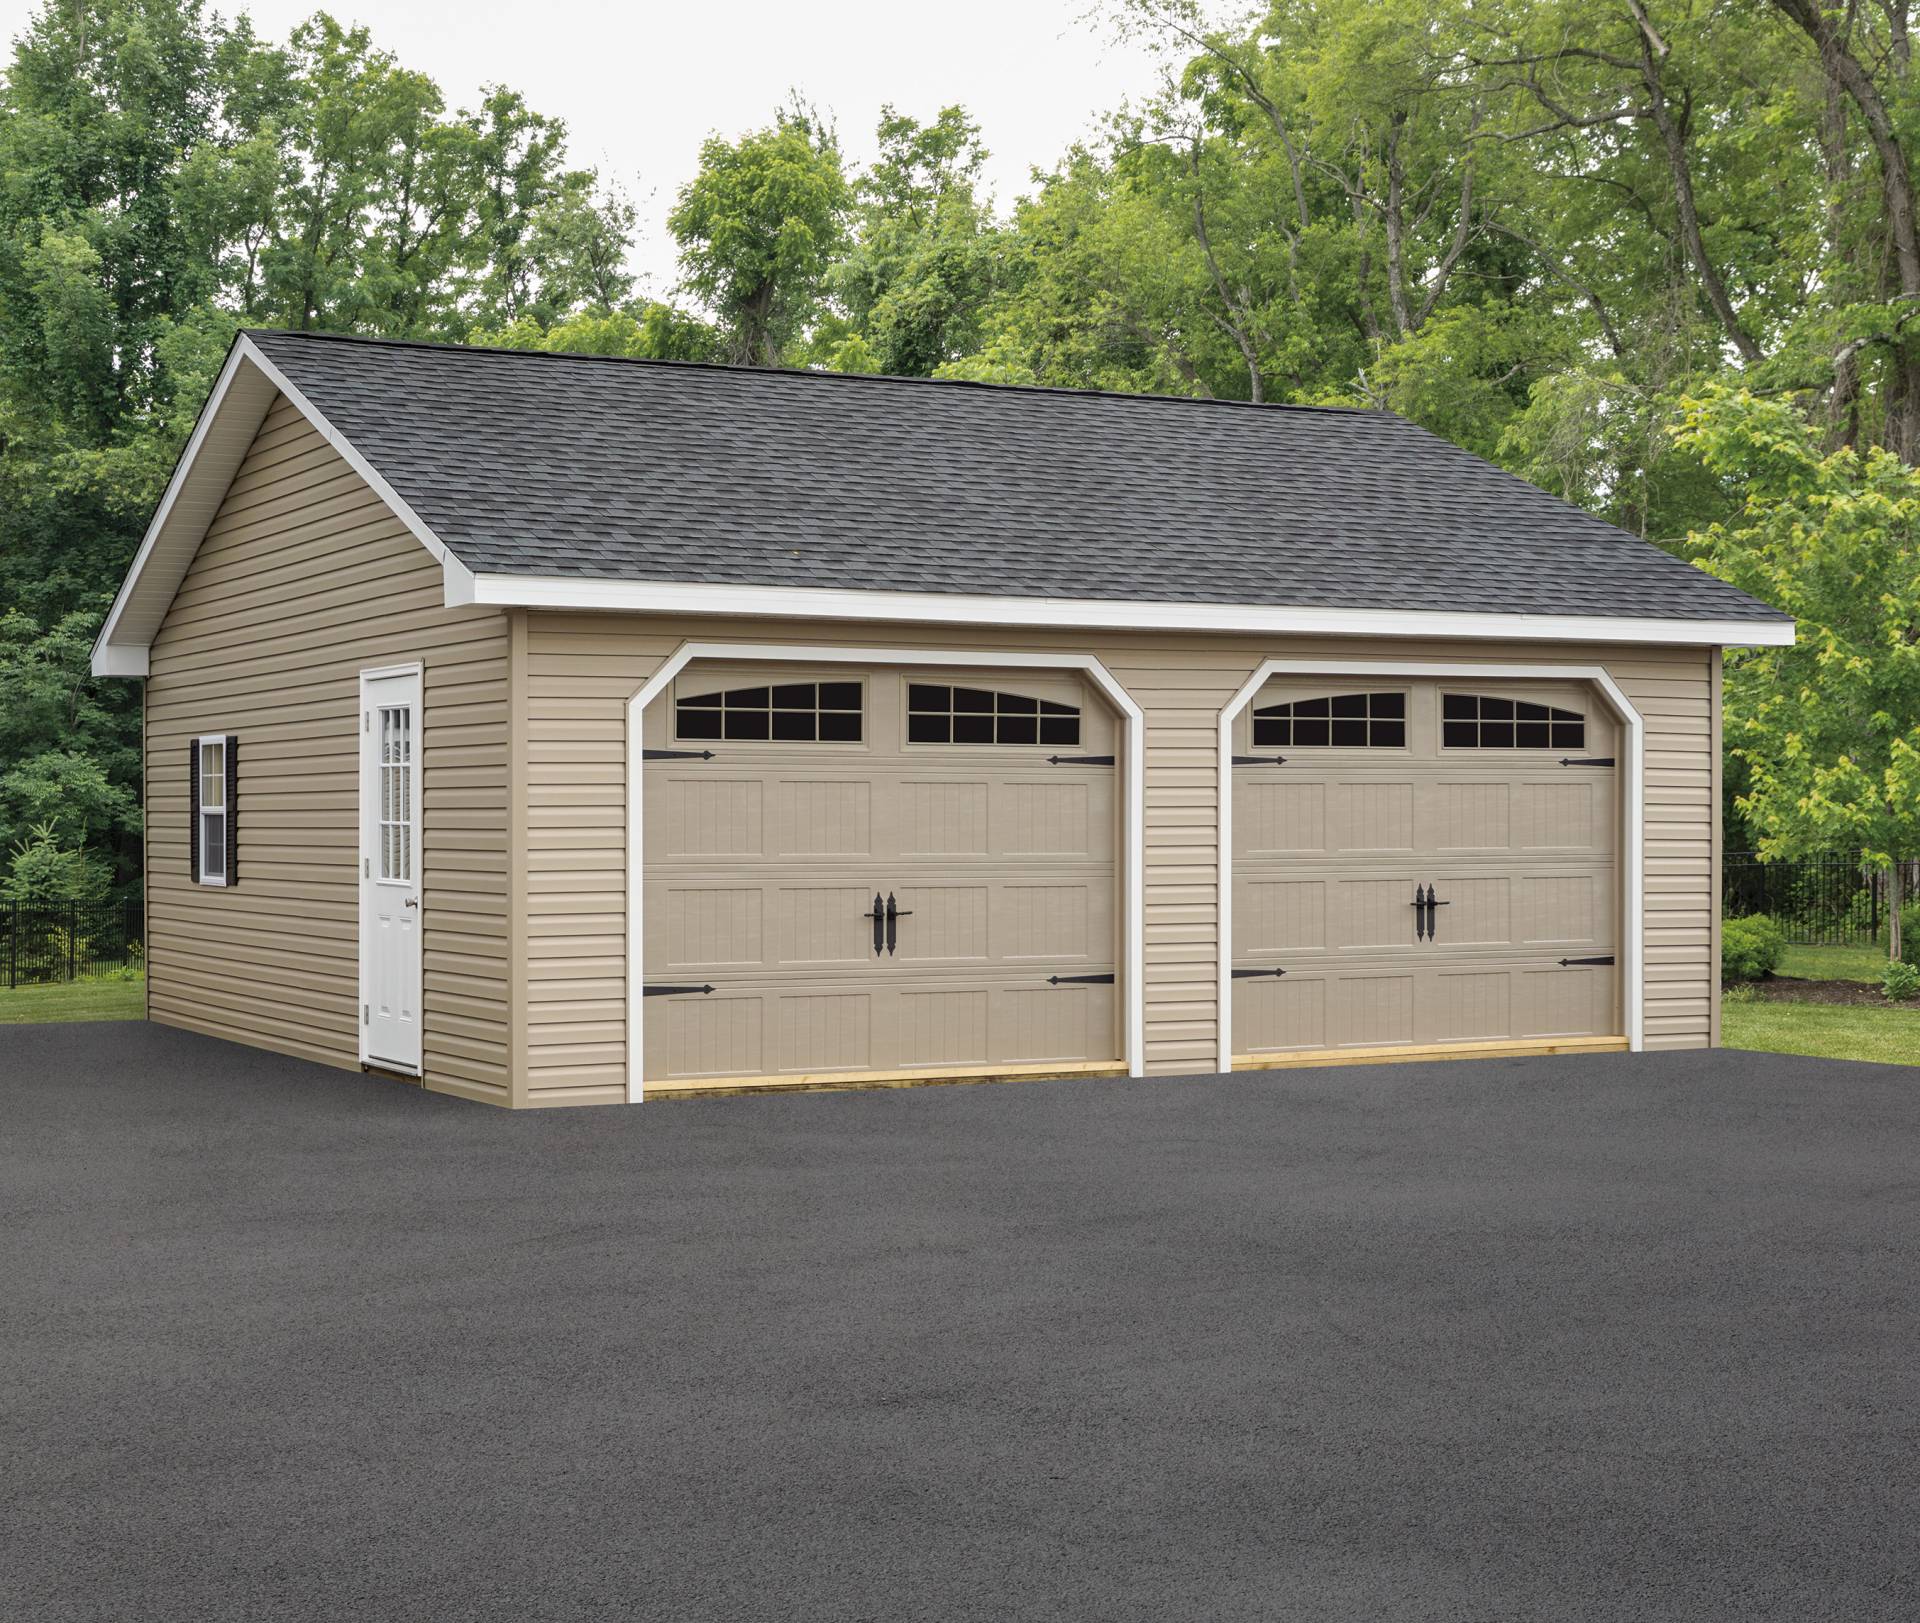 Repairing The Garage In Your Home